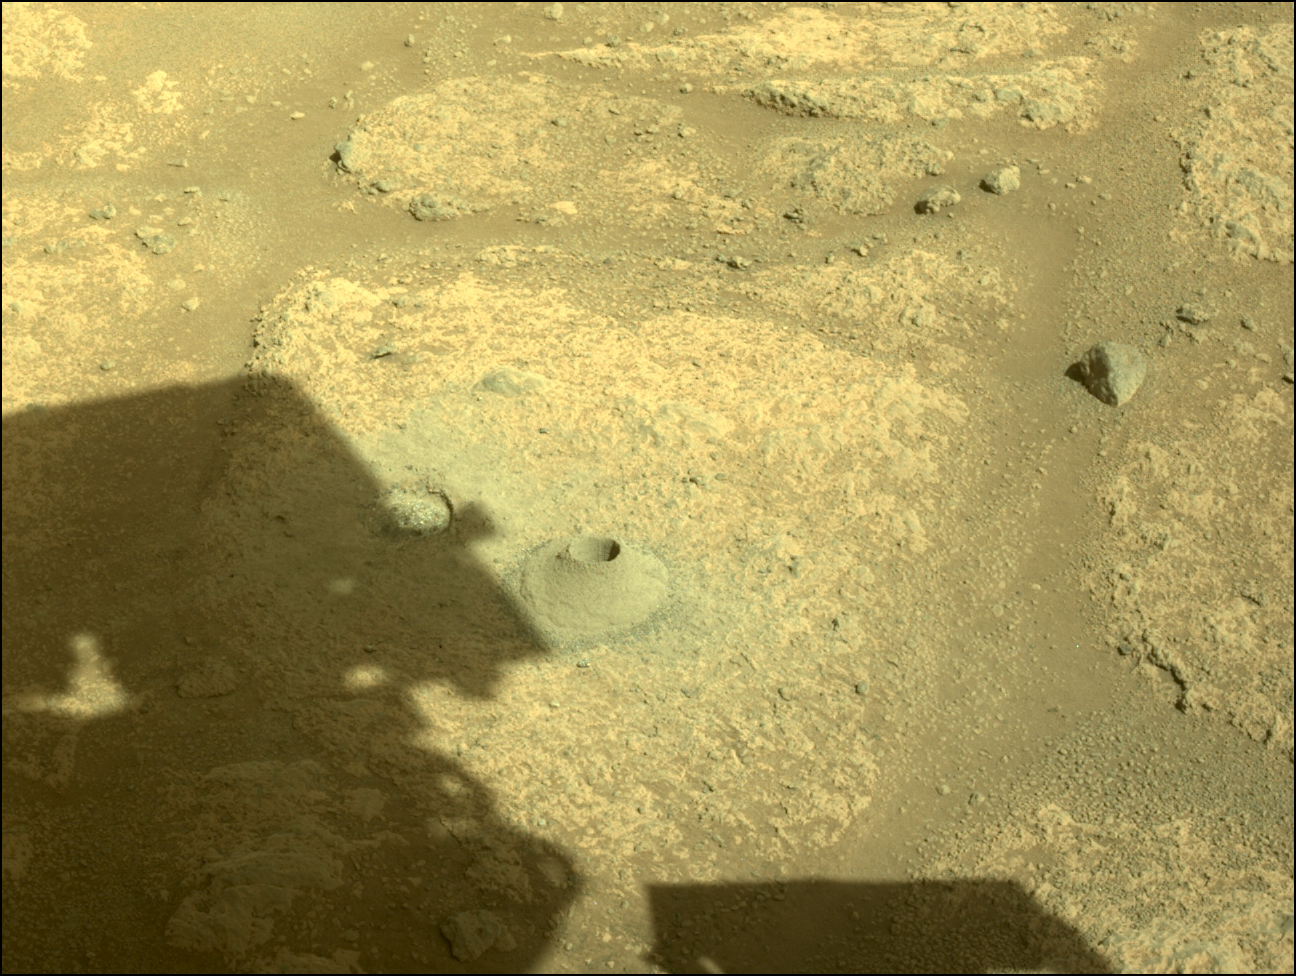 Image taken was taken by the Mars Perseverance rover after collecting the rock sample 1 at Roubion.